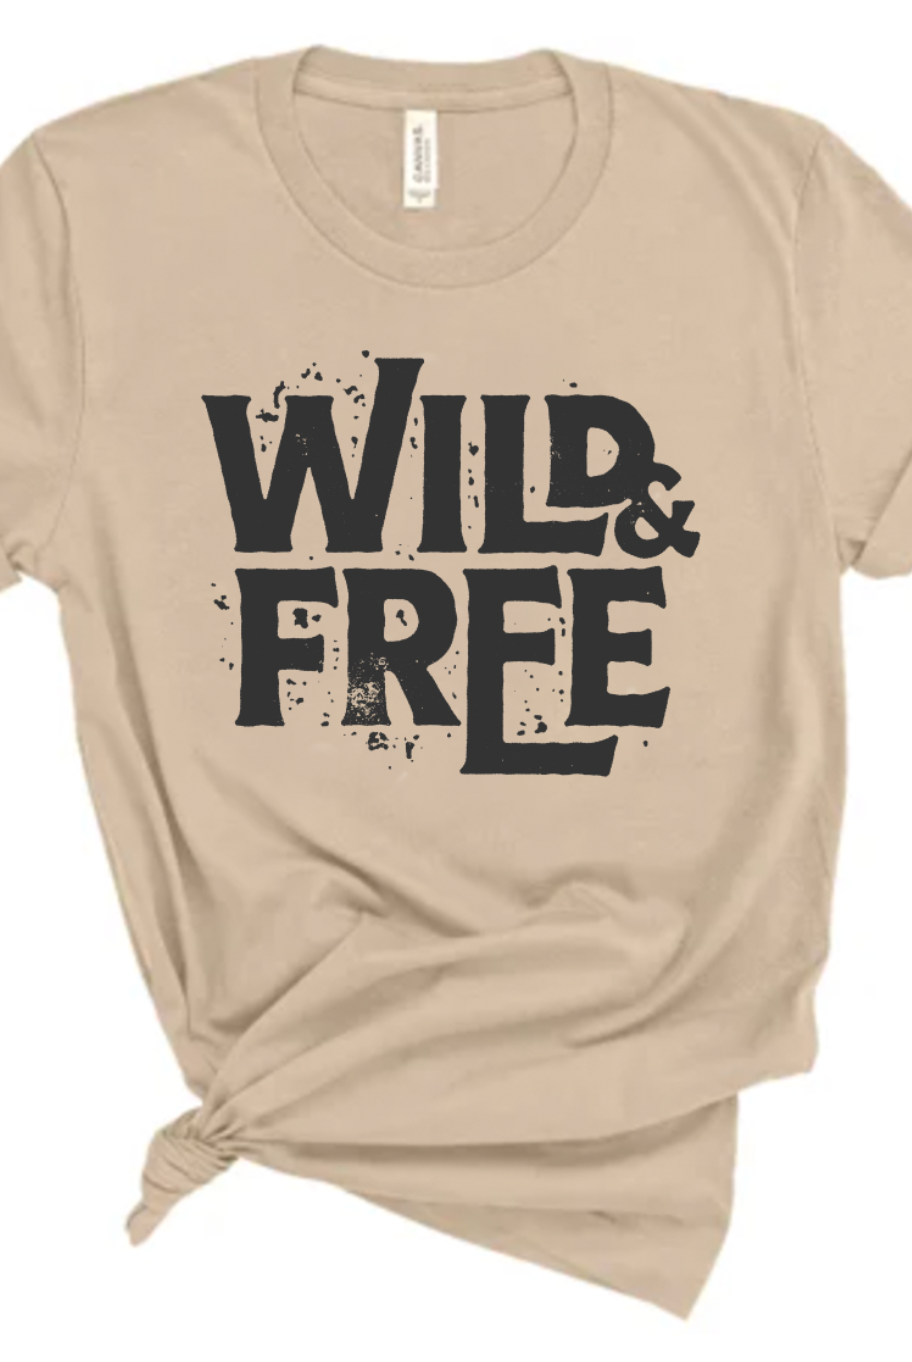 Wild and Free Vintage Country Western Girl Unisex TShirt in Tan.